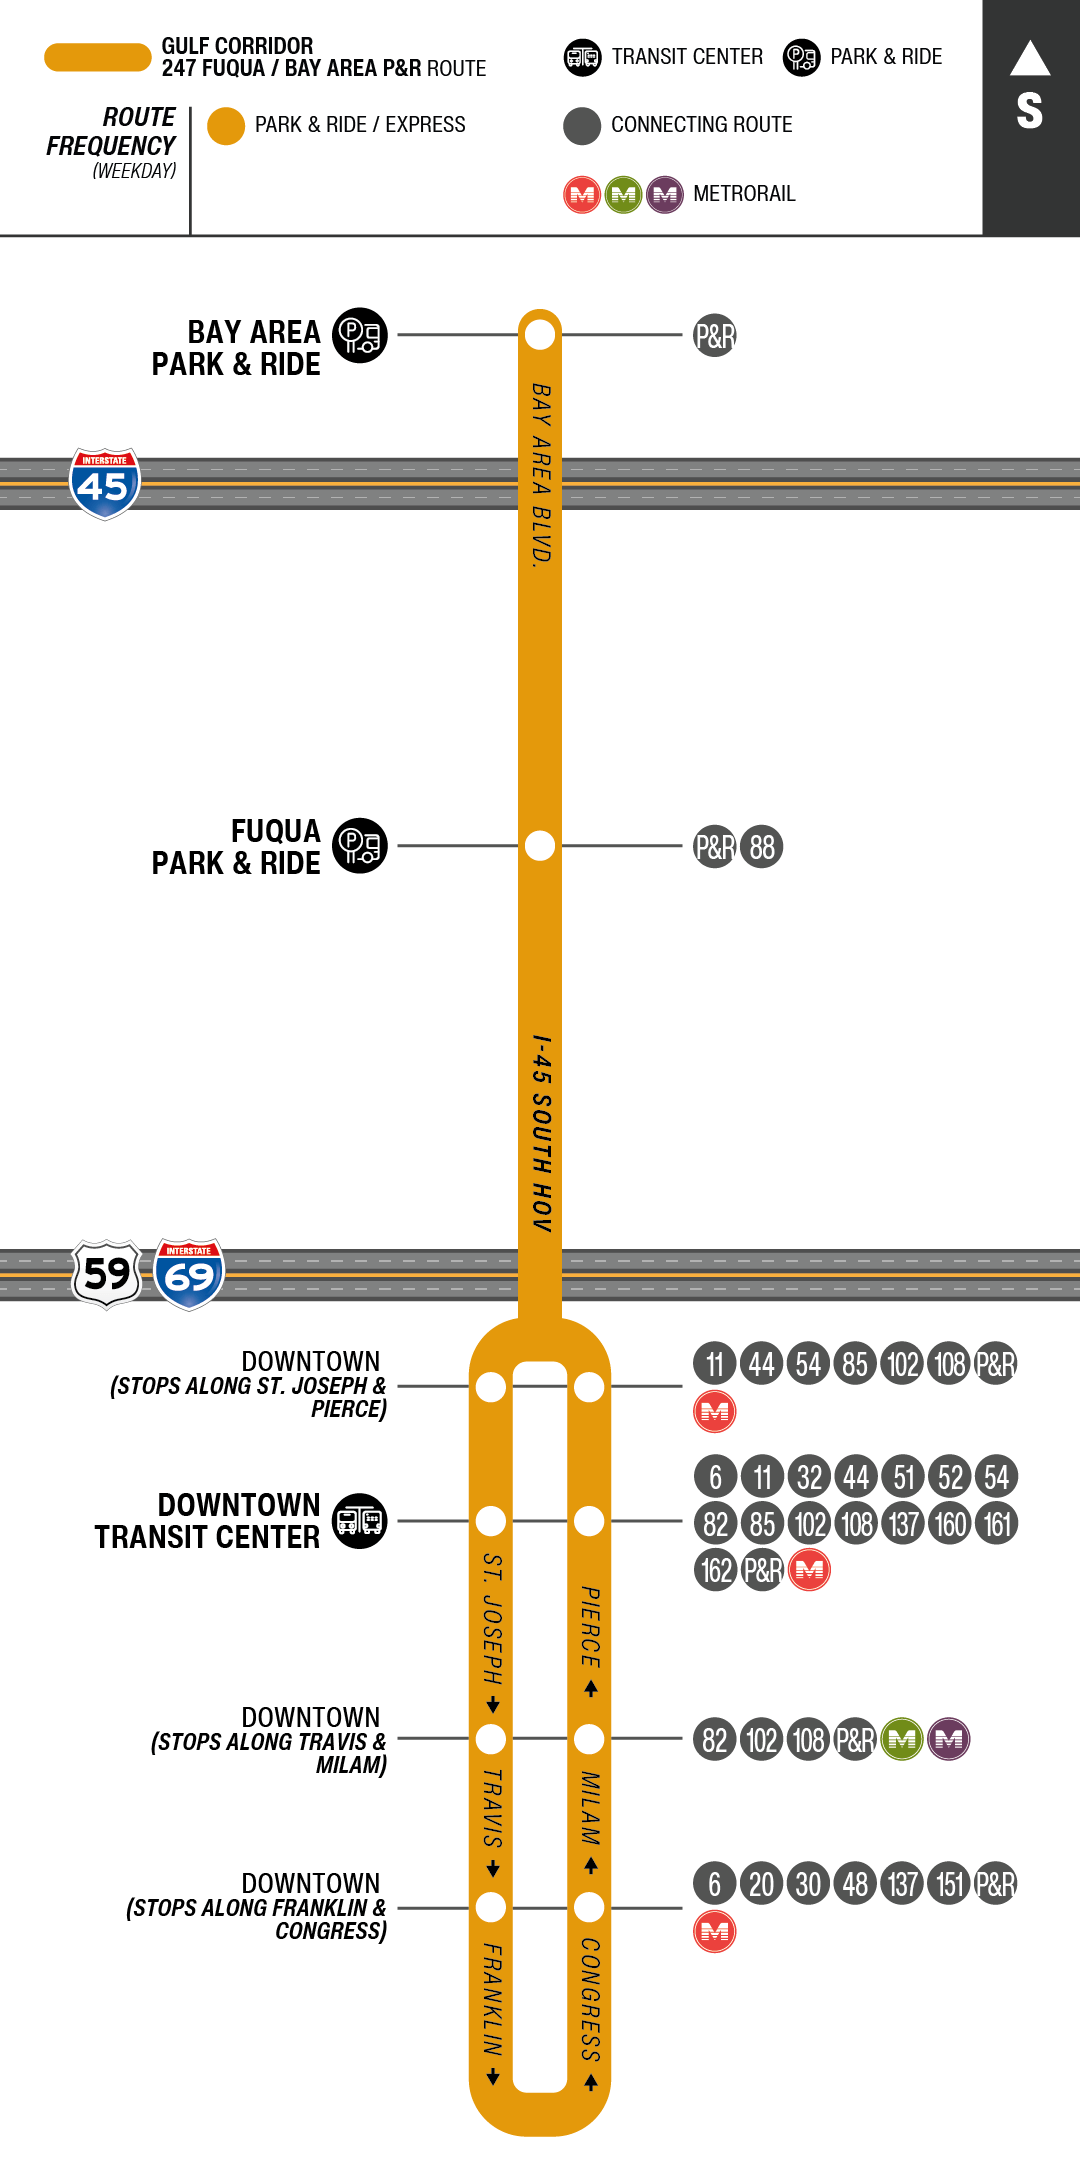 Route map for 247 Fuqua / Bay Area Park & Ride bus